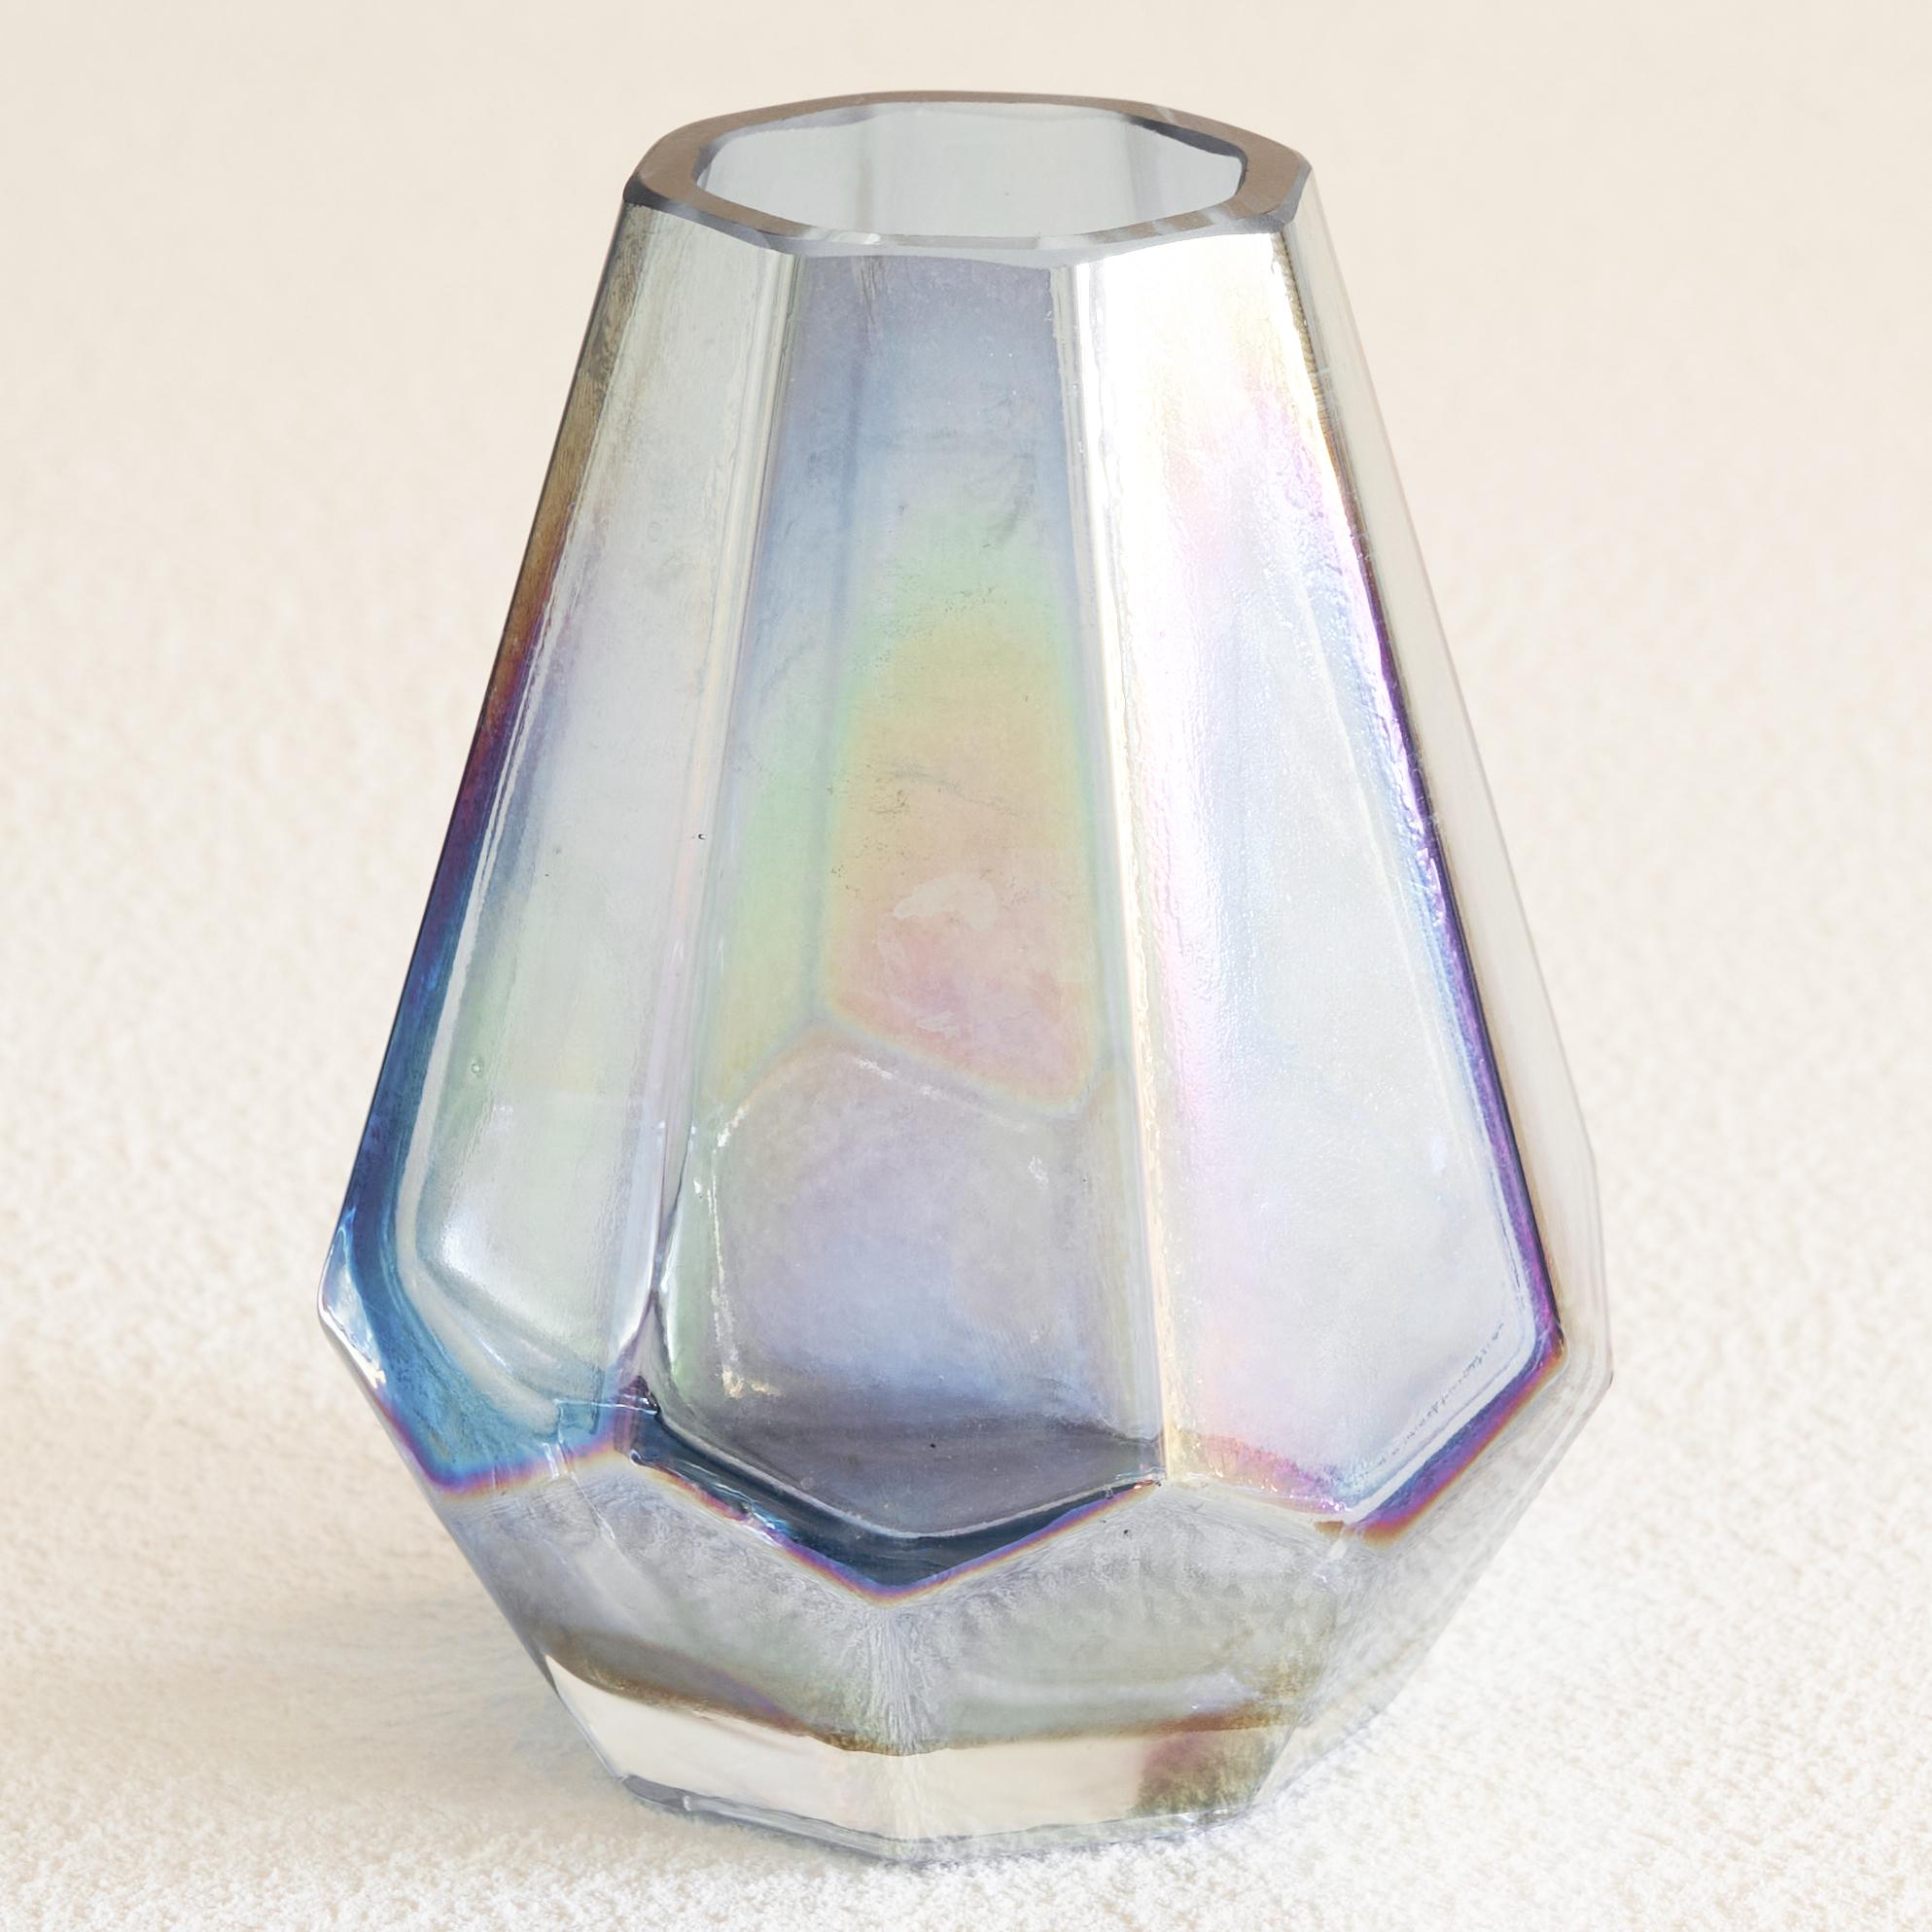 Iridescent Art Deco glass vase 1930s.

This is a very distinct and unique glass vase in iridescent pressed glass from the Art Deco period. This octagonal glass vase has a wonderful base shape, but the most interesting feature of this glass vase is